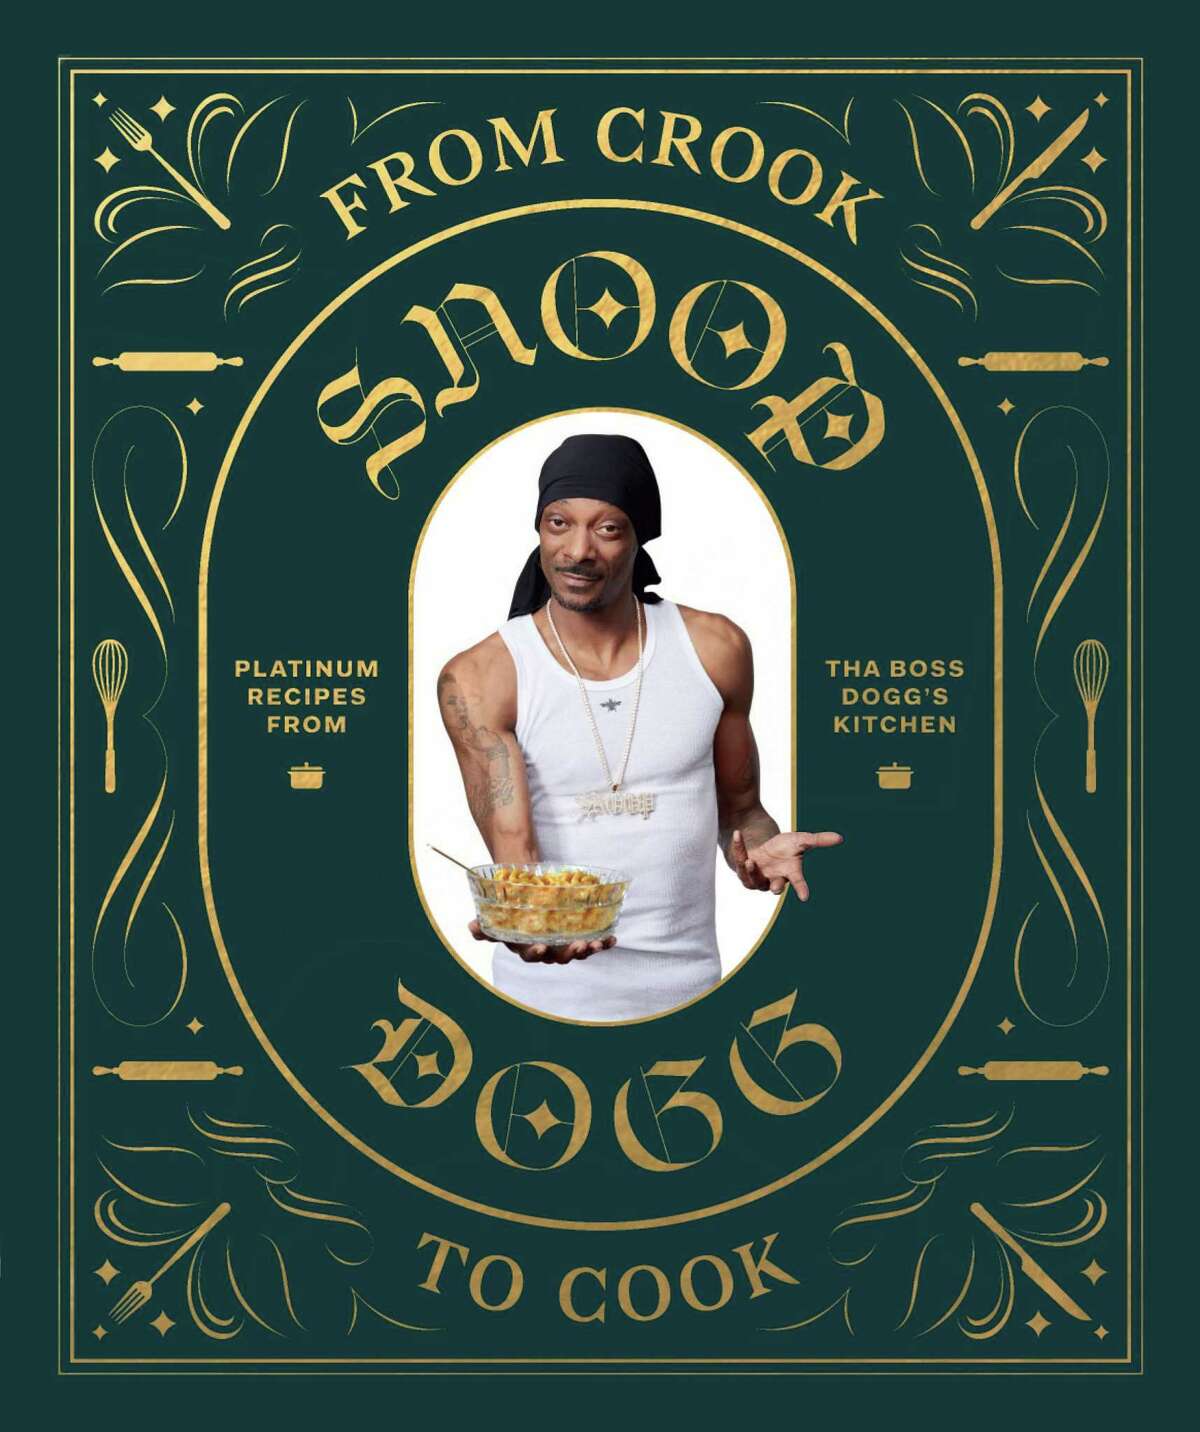 "From Crook to Cook" by Snoop Dogg (Chronicle Books)